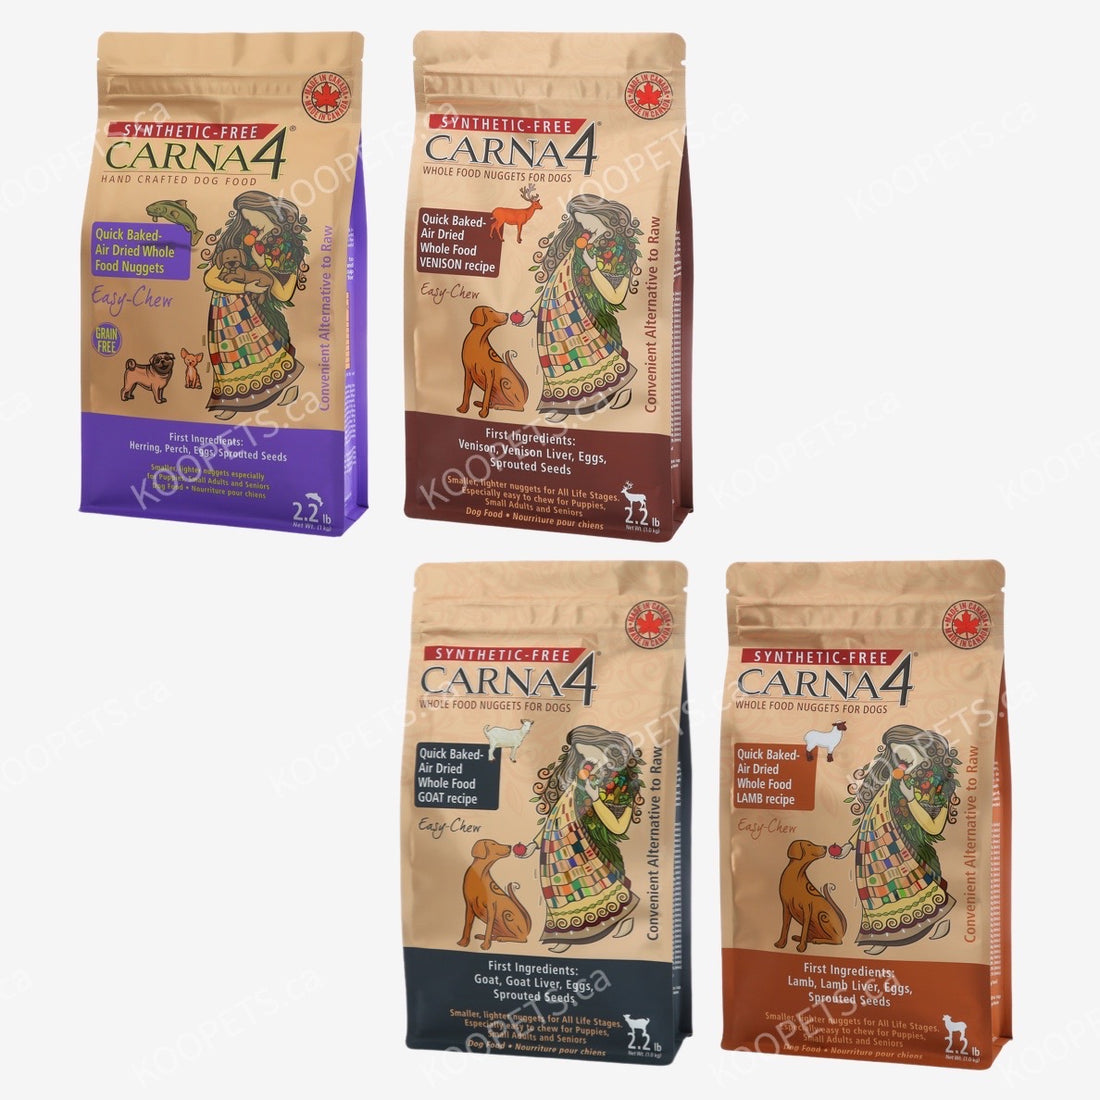 Carna4 | Hand Crafted Dog Dry Food - Easy Chew